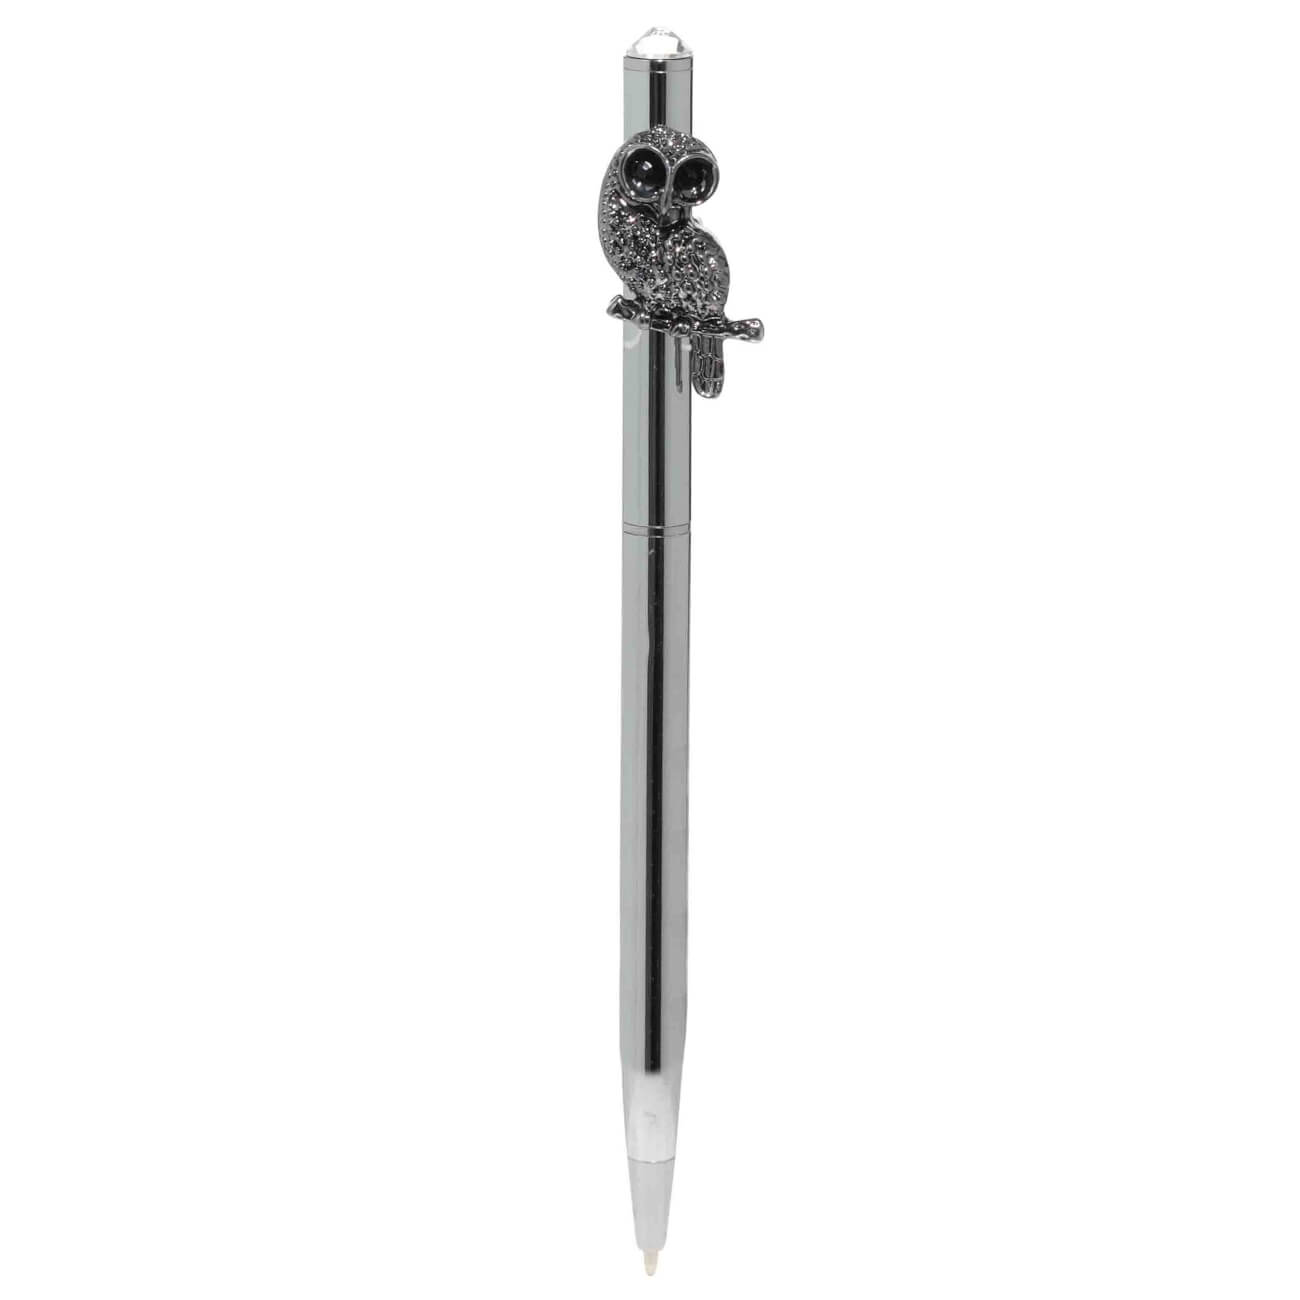 Ballpoint pen, 14 cm, with a figure, steel, black and silver, Owl, Draw figure изображение № 1